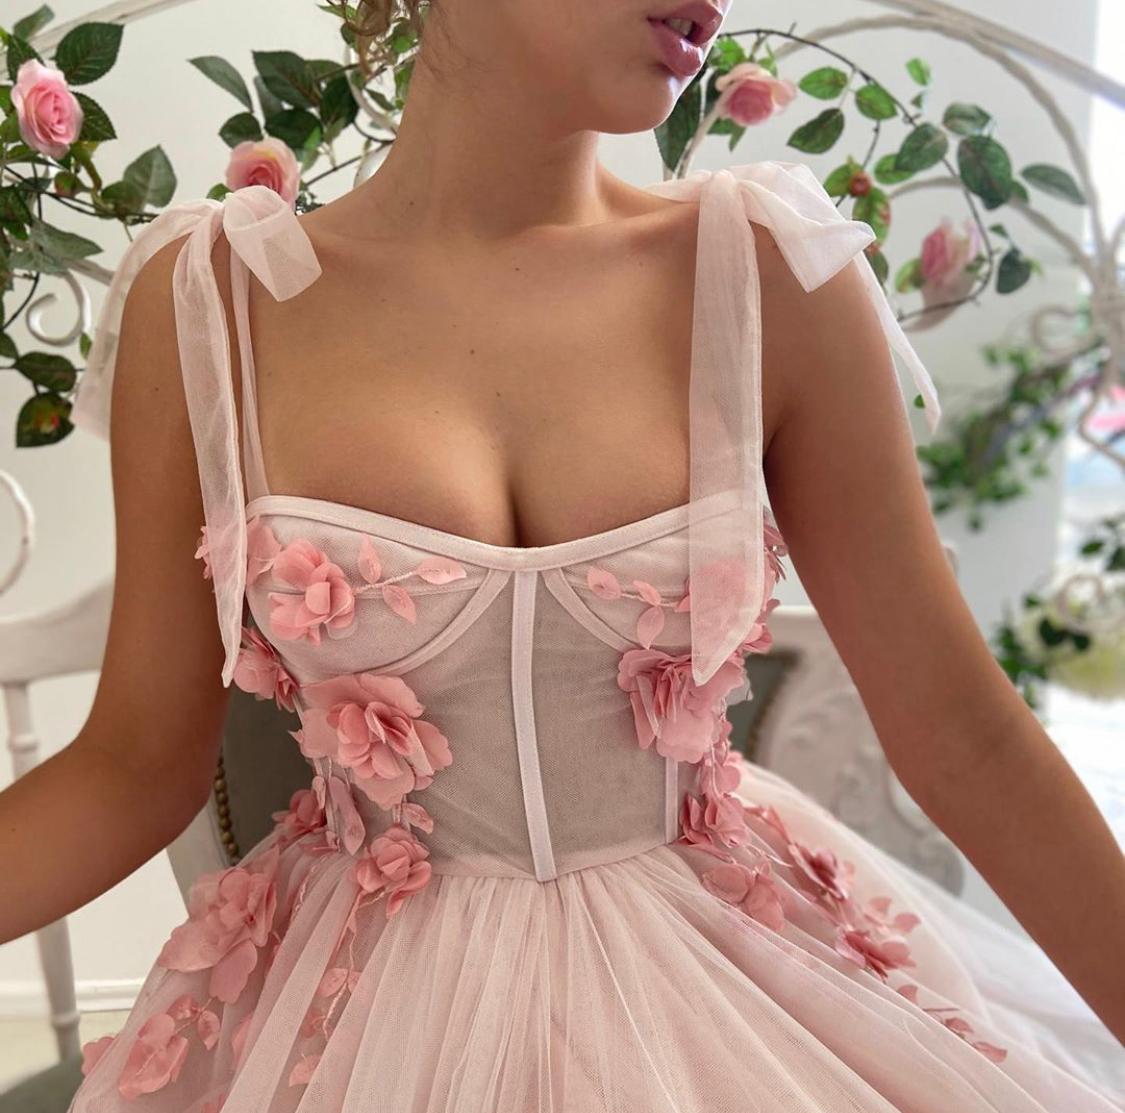 Pink A-Line dress with bow straps and embroidery